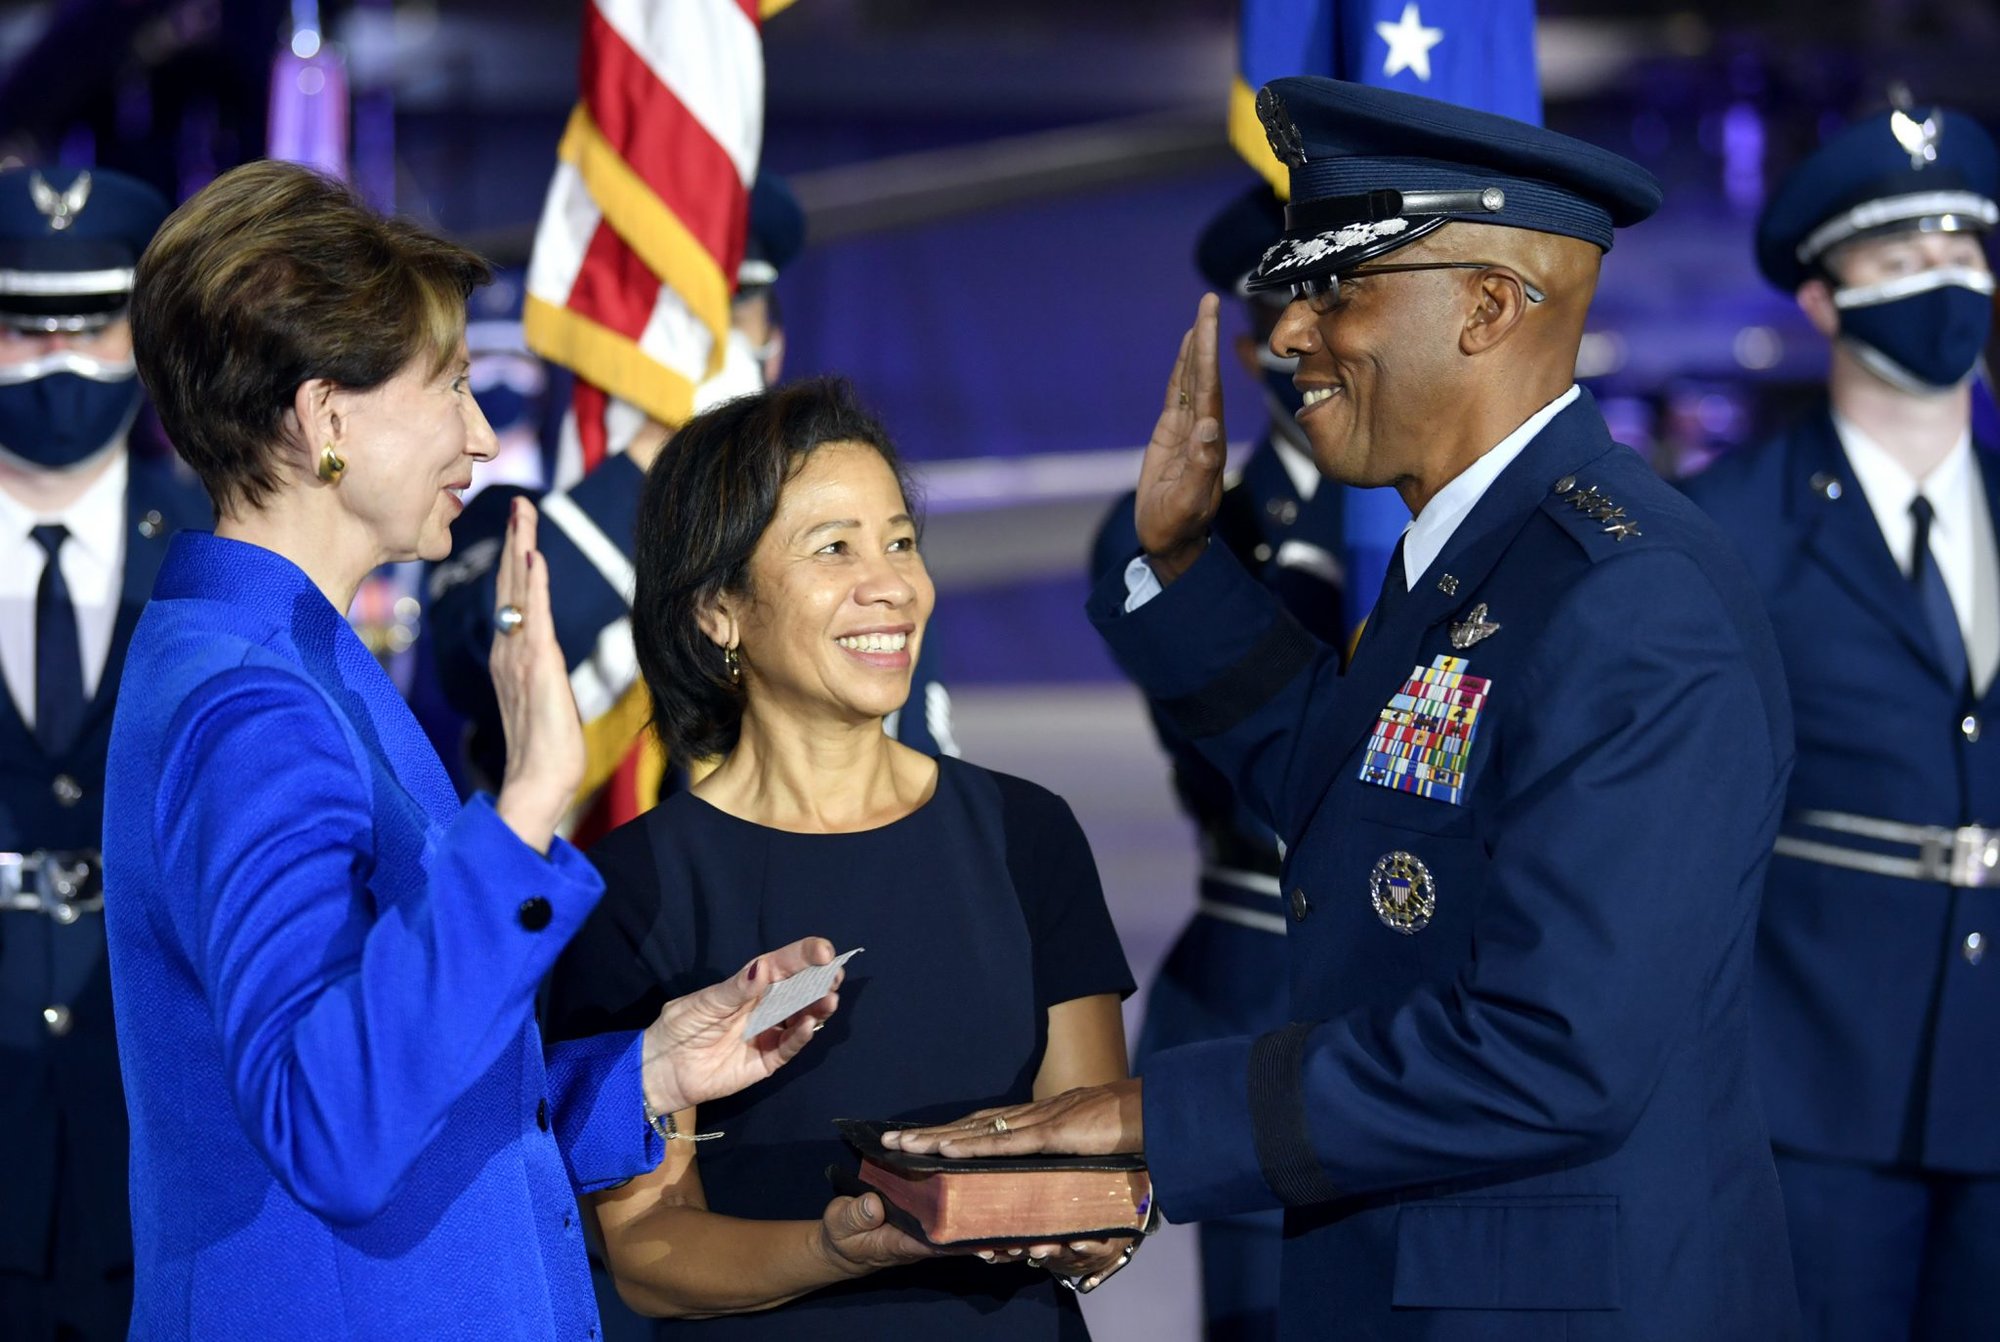 Secretary of the Air Force Barbara M. Barrett administers the oath of office to incoming Air Force Chief of Staff Gen. Charles Q. Brown Jr.during the CSAF Transfer of Responsibility ceremony at Joint Base Andrews, Maryland, Aug. 6, 2020. Brown is the 22nd Chief of Staff of the Air Force. U.S. Air Force photo by Wayne Clark